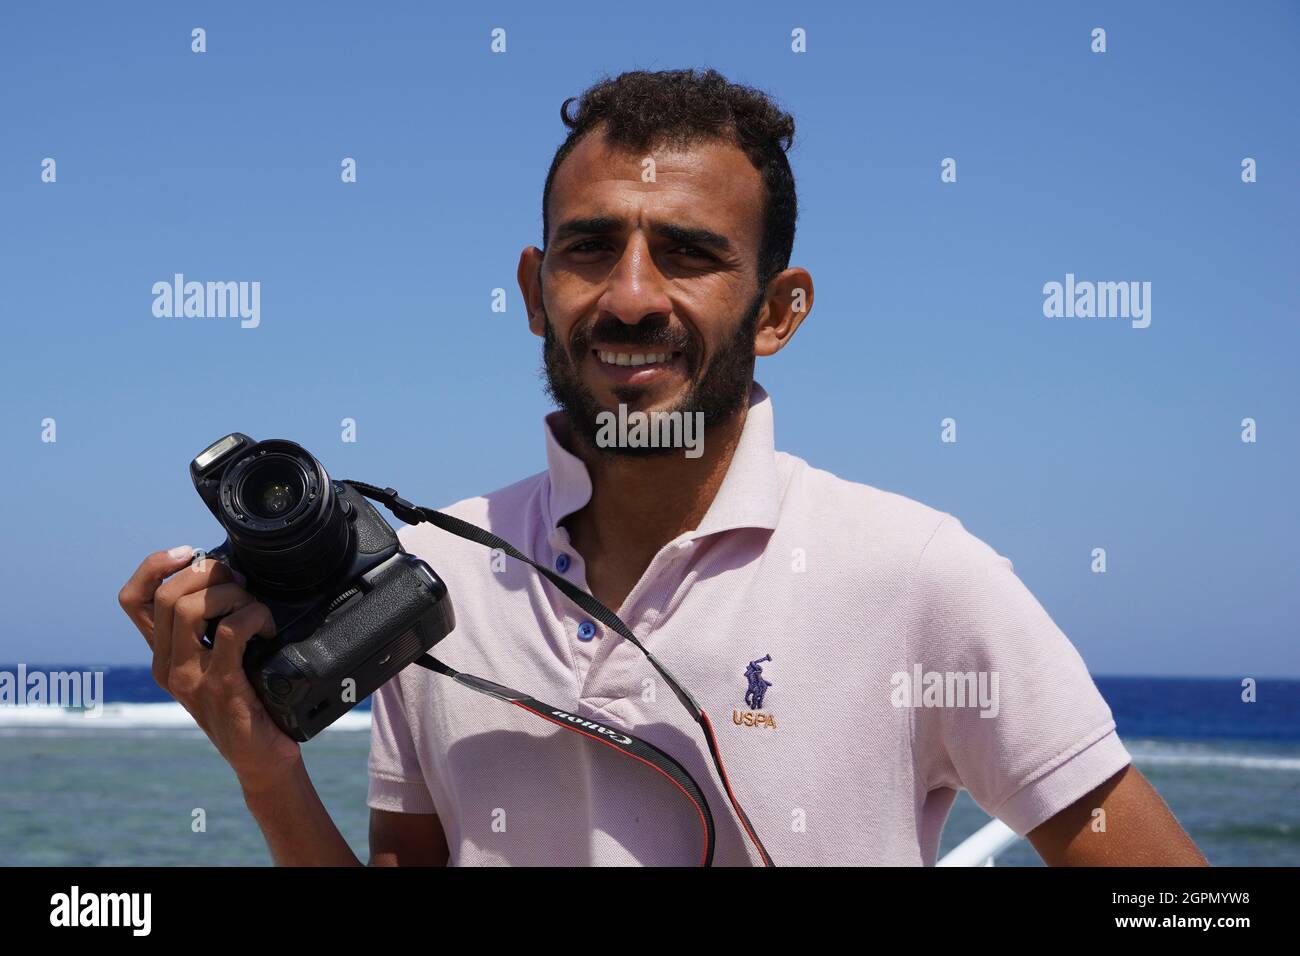 MARSA ALAM, EGYPT - September 25, 2021. Portrait of smiling Arabic man Holding photo Camera on Red sea background. Photographing tourists during sea t Stock Photo